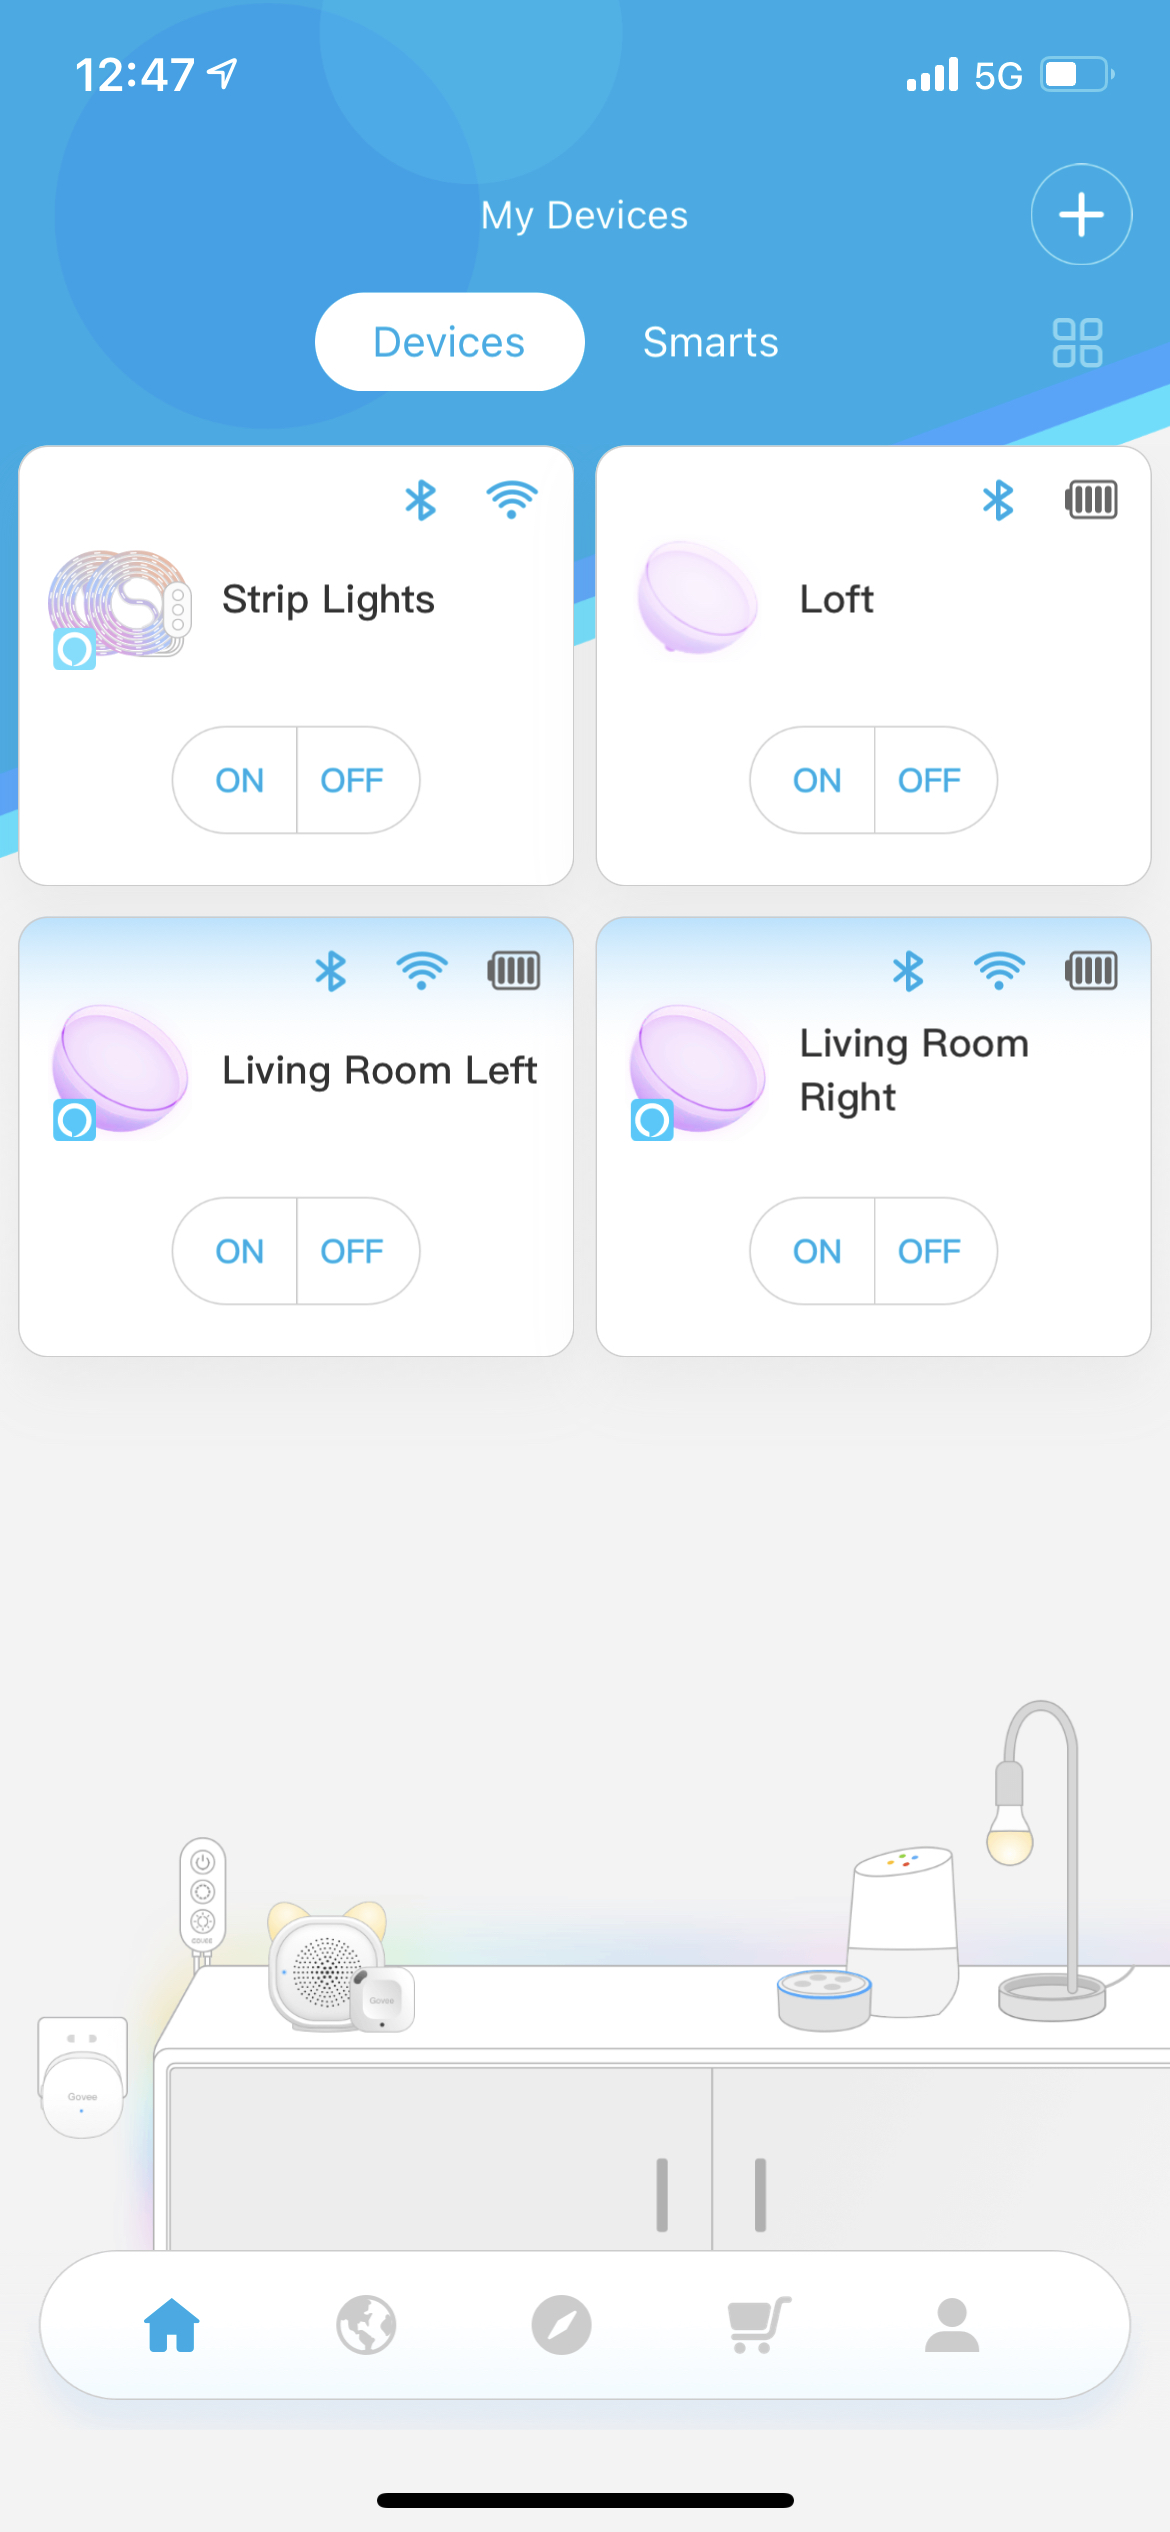 Govee plug im not populating lights in homekit why is that? Its listed  under devices but I also went to the light section and manually added it.  Im only referring to the